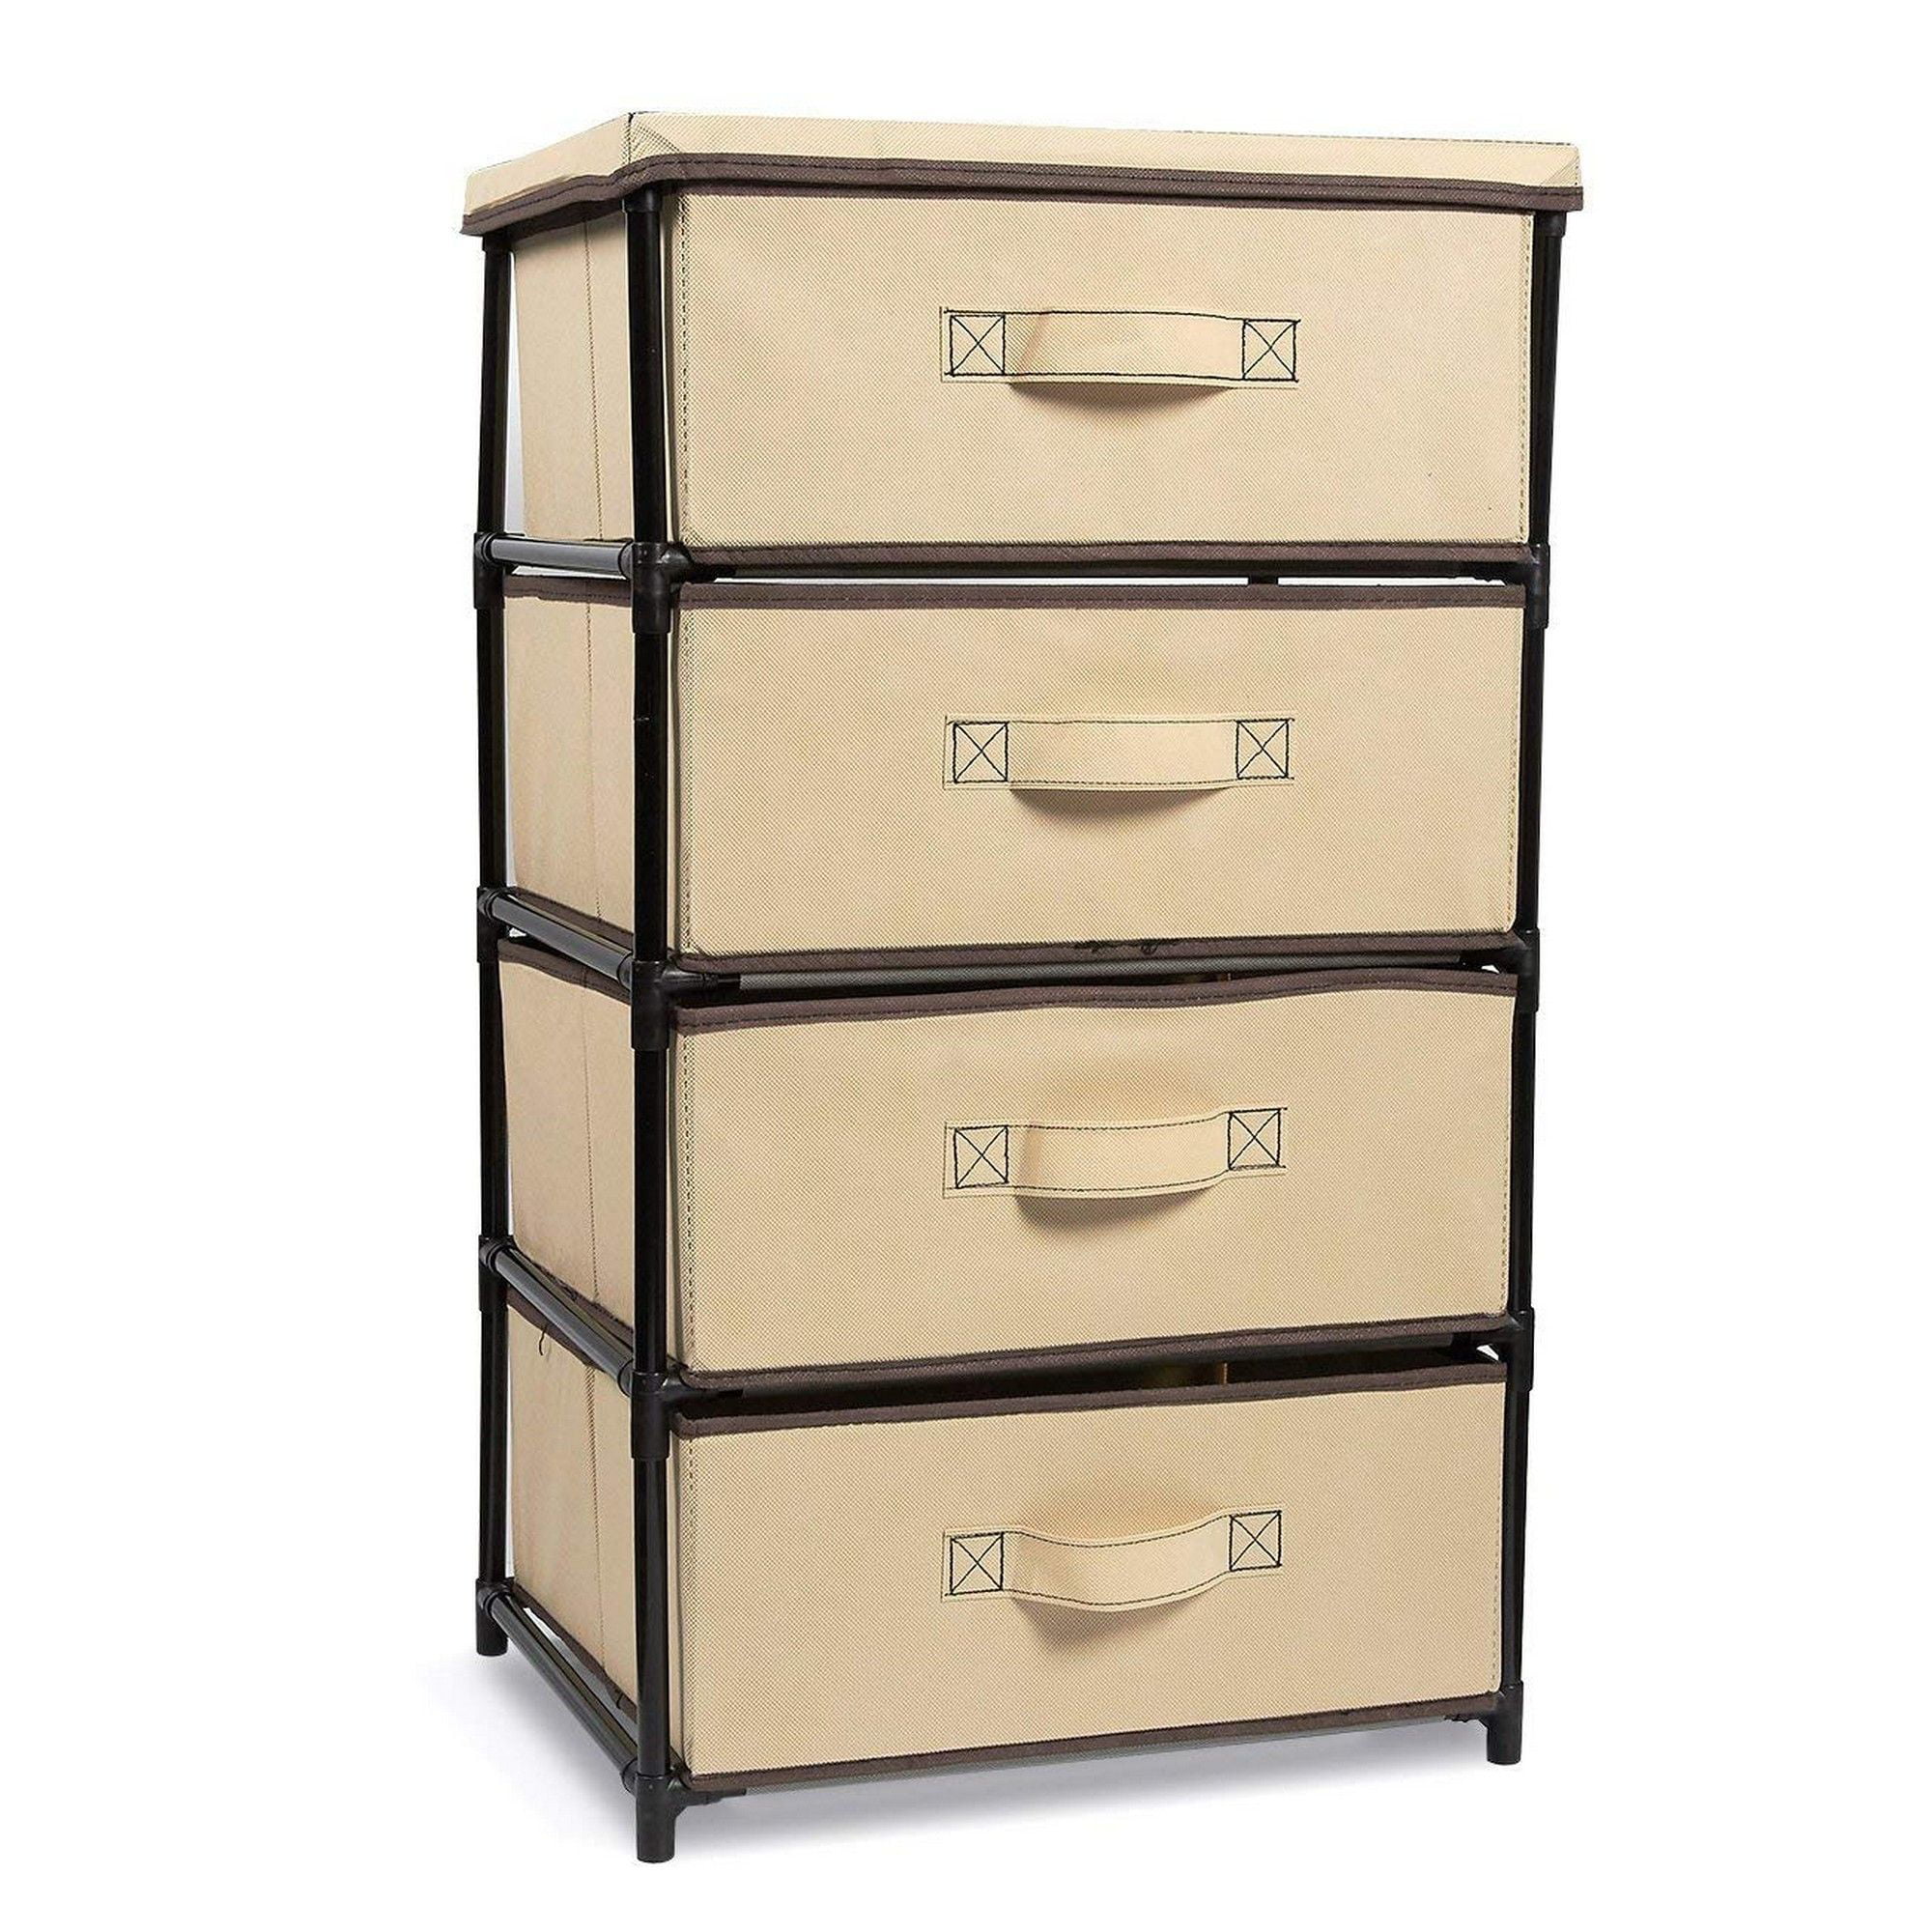 Clothes Storage Organizer Drawers For, Clothes Storage Drawers